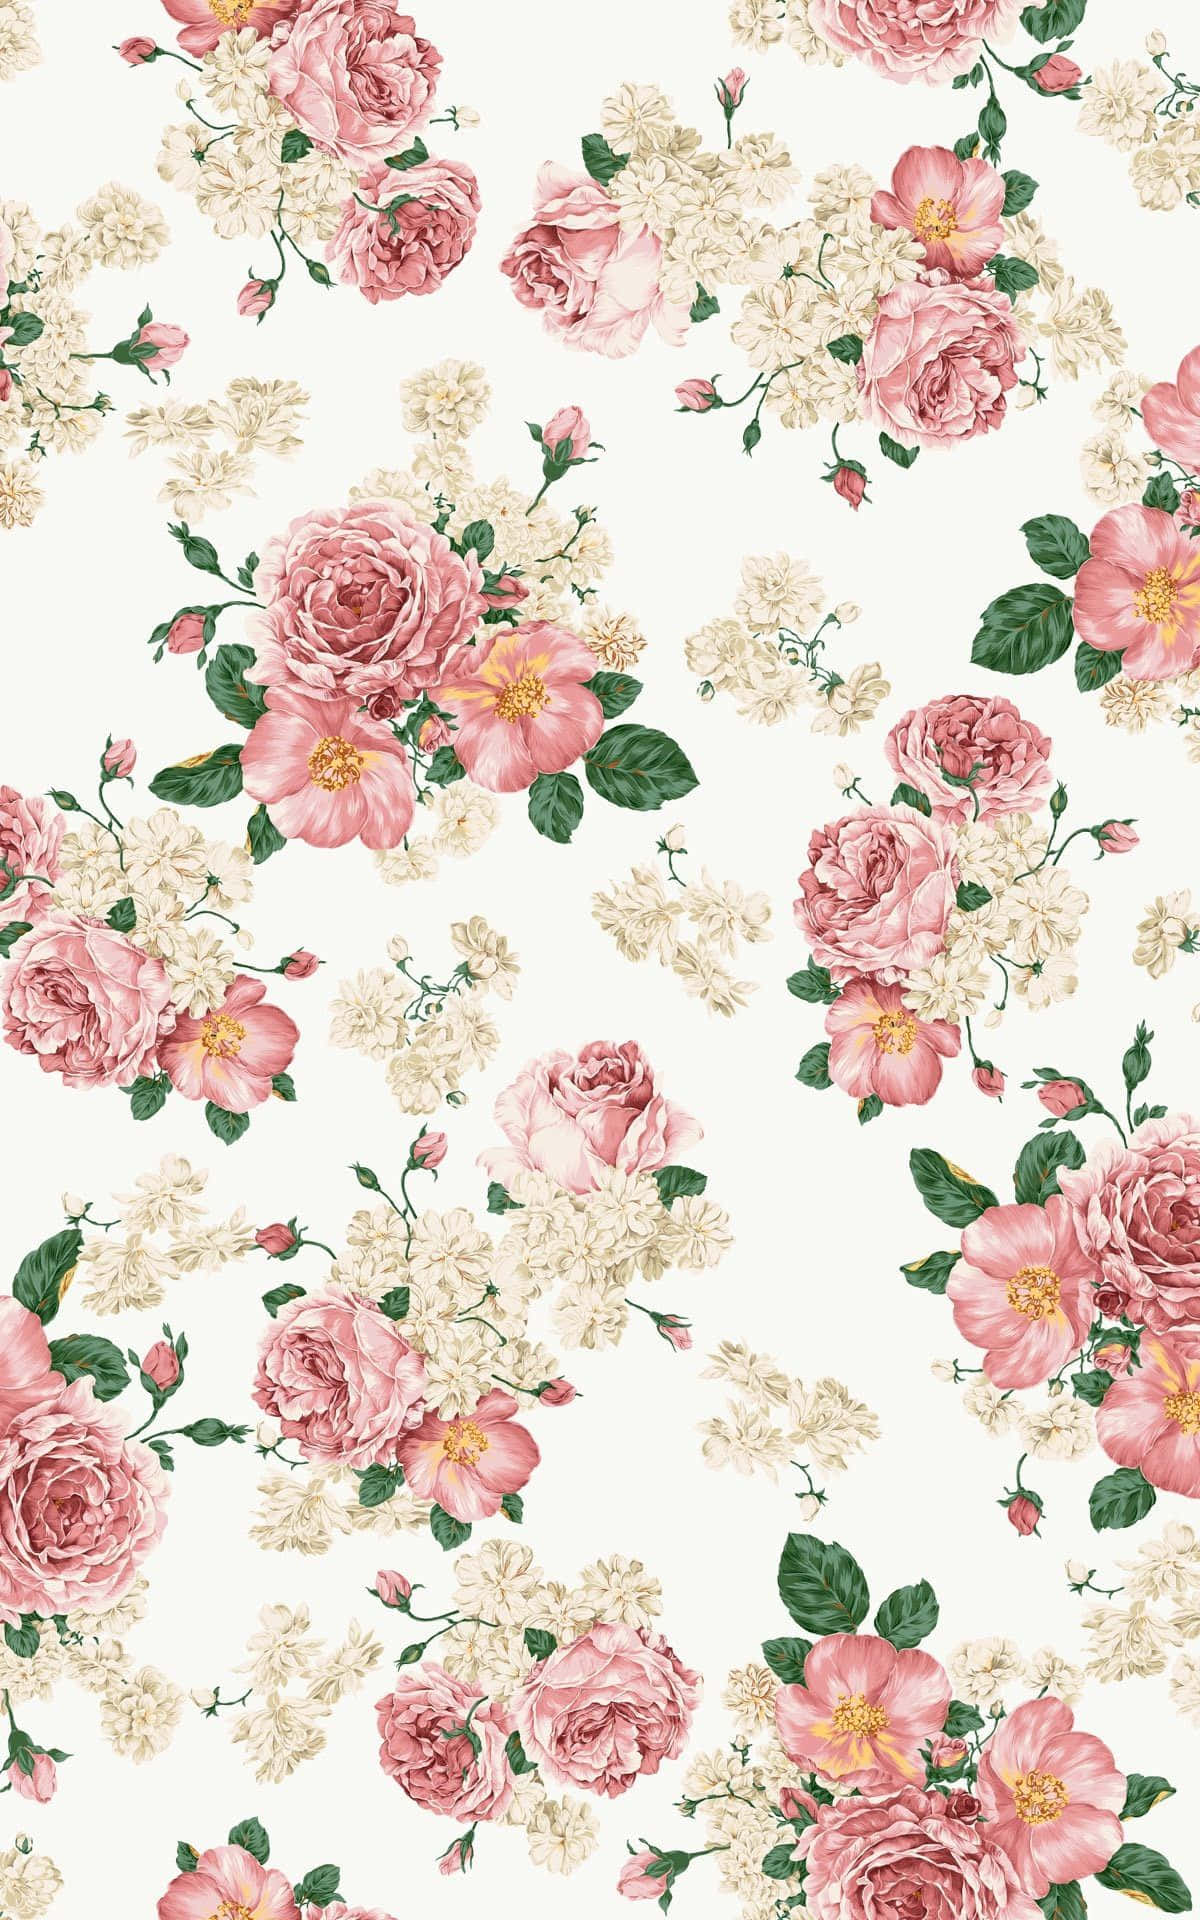 A vibrant vintage flower blooming in the summer air. Wallpaper